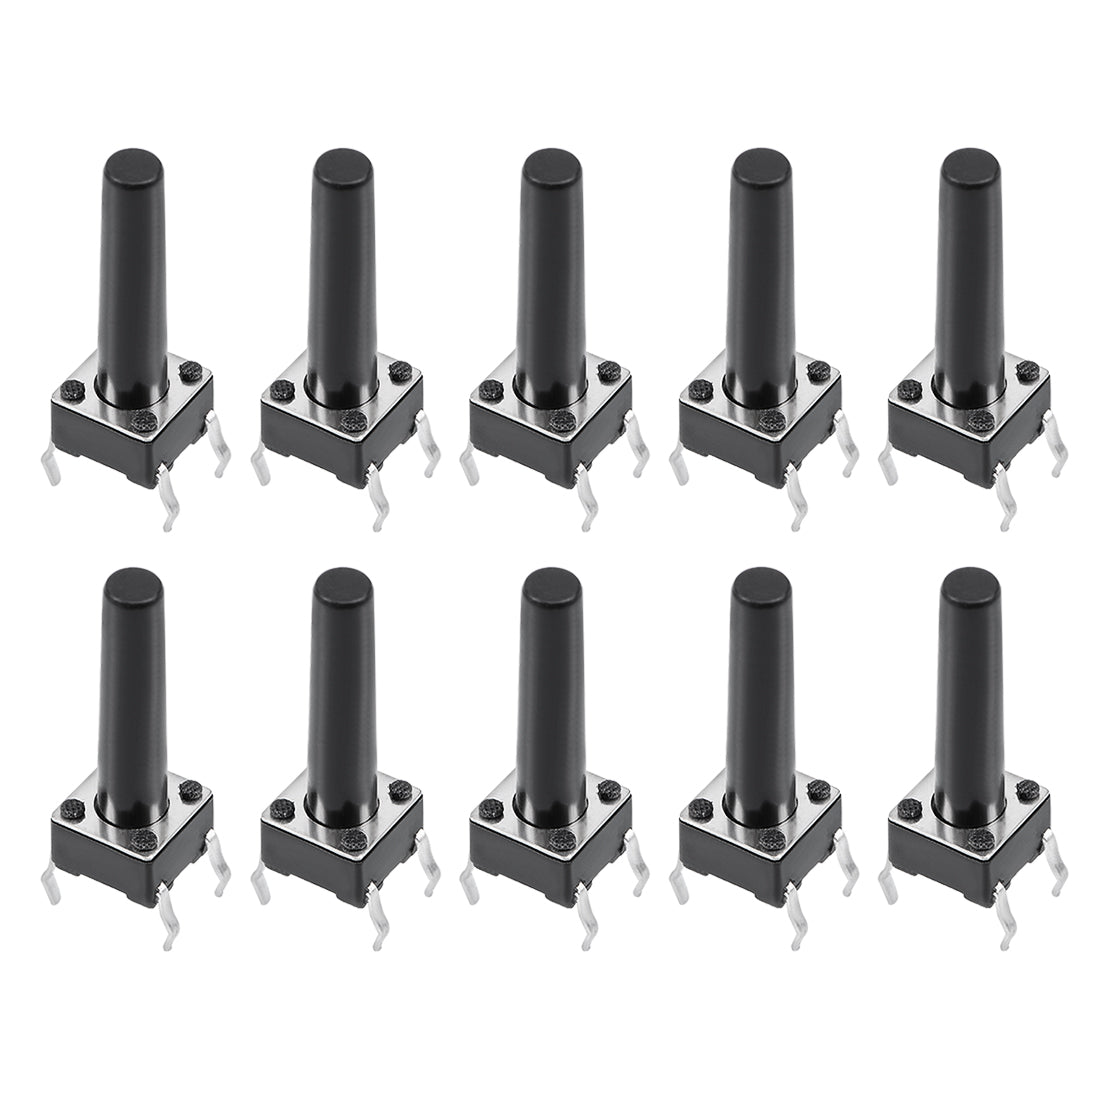 Uxcell 6x6x18mm Panel Mini/Micro/Small PCB Momentary Tactile Tact Push  Button Switch DIP 10PCS